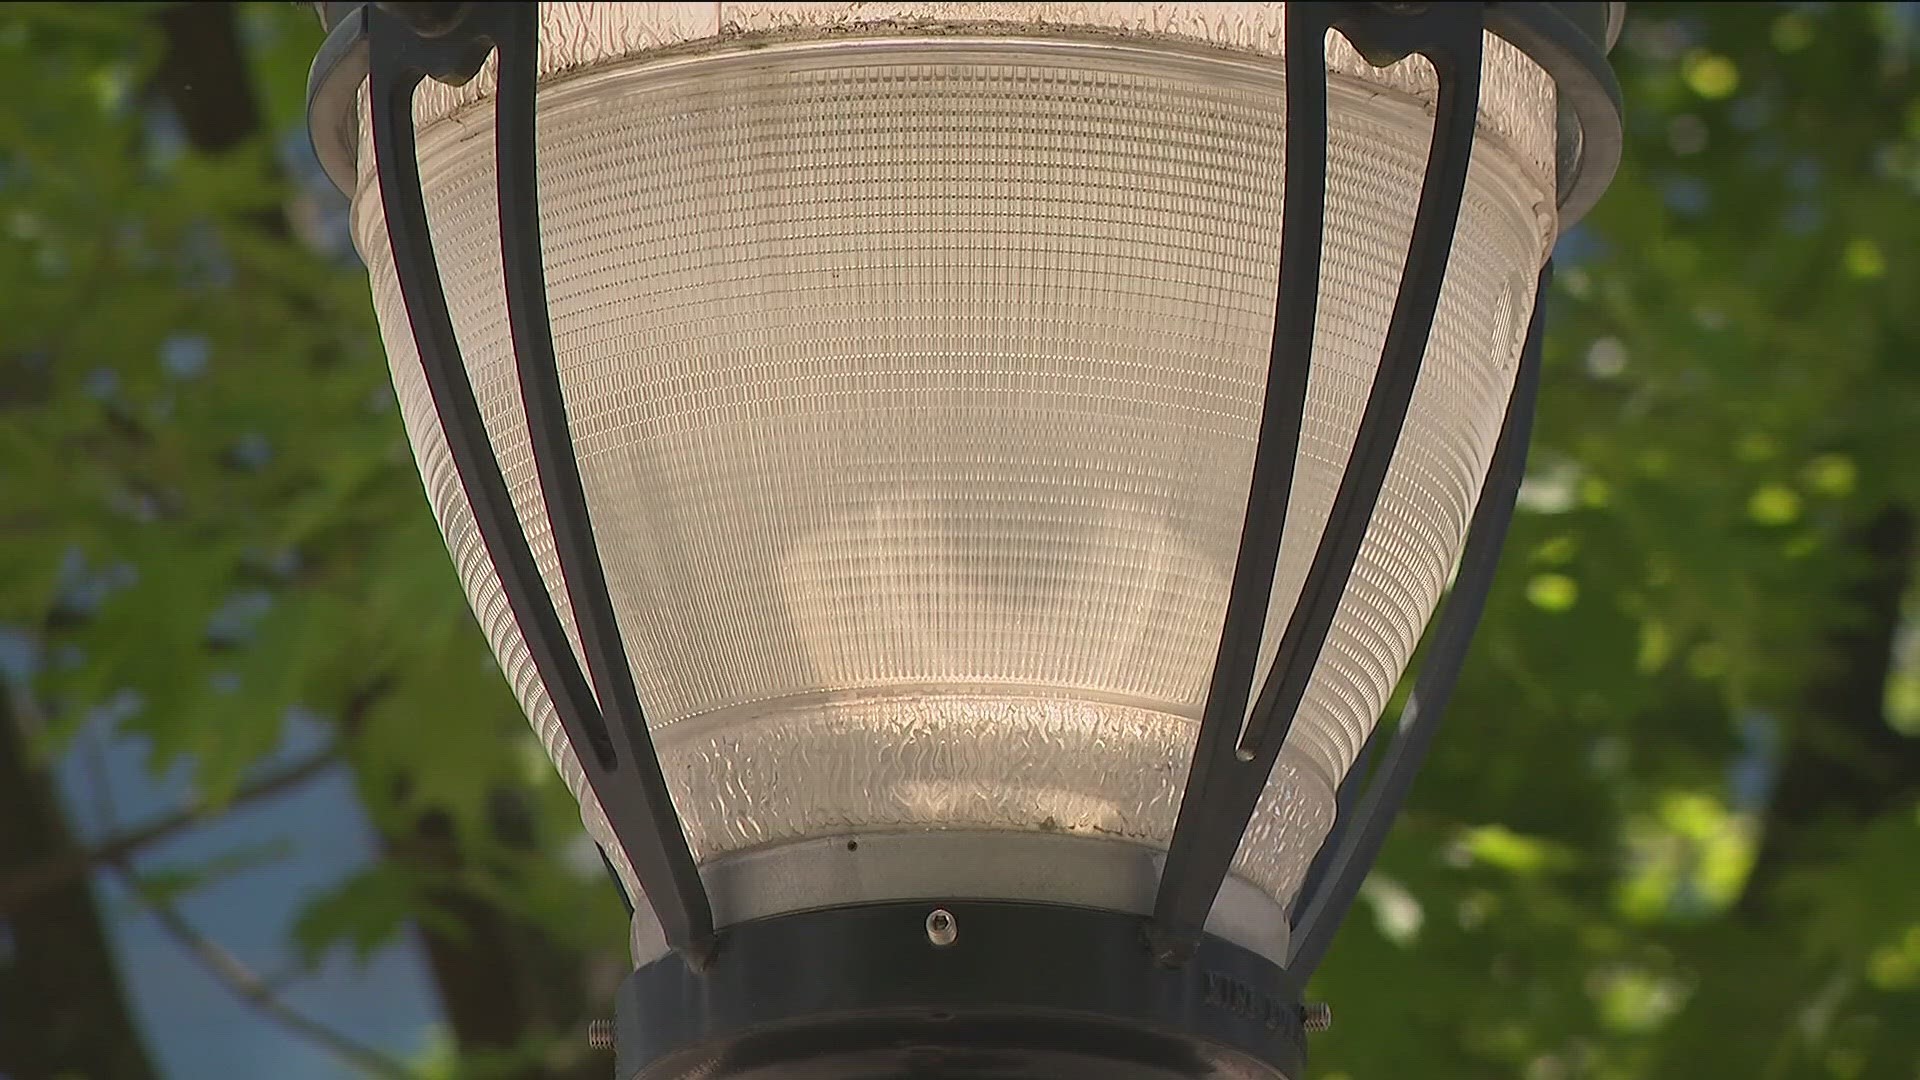 Phase 3 of the "Light Up the Night" initiative would add additional street lights at key locations around the city and upgrade existing street lights to LED.